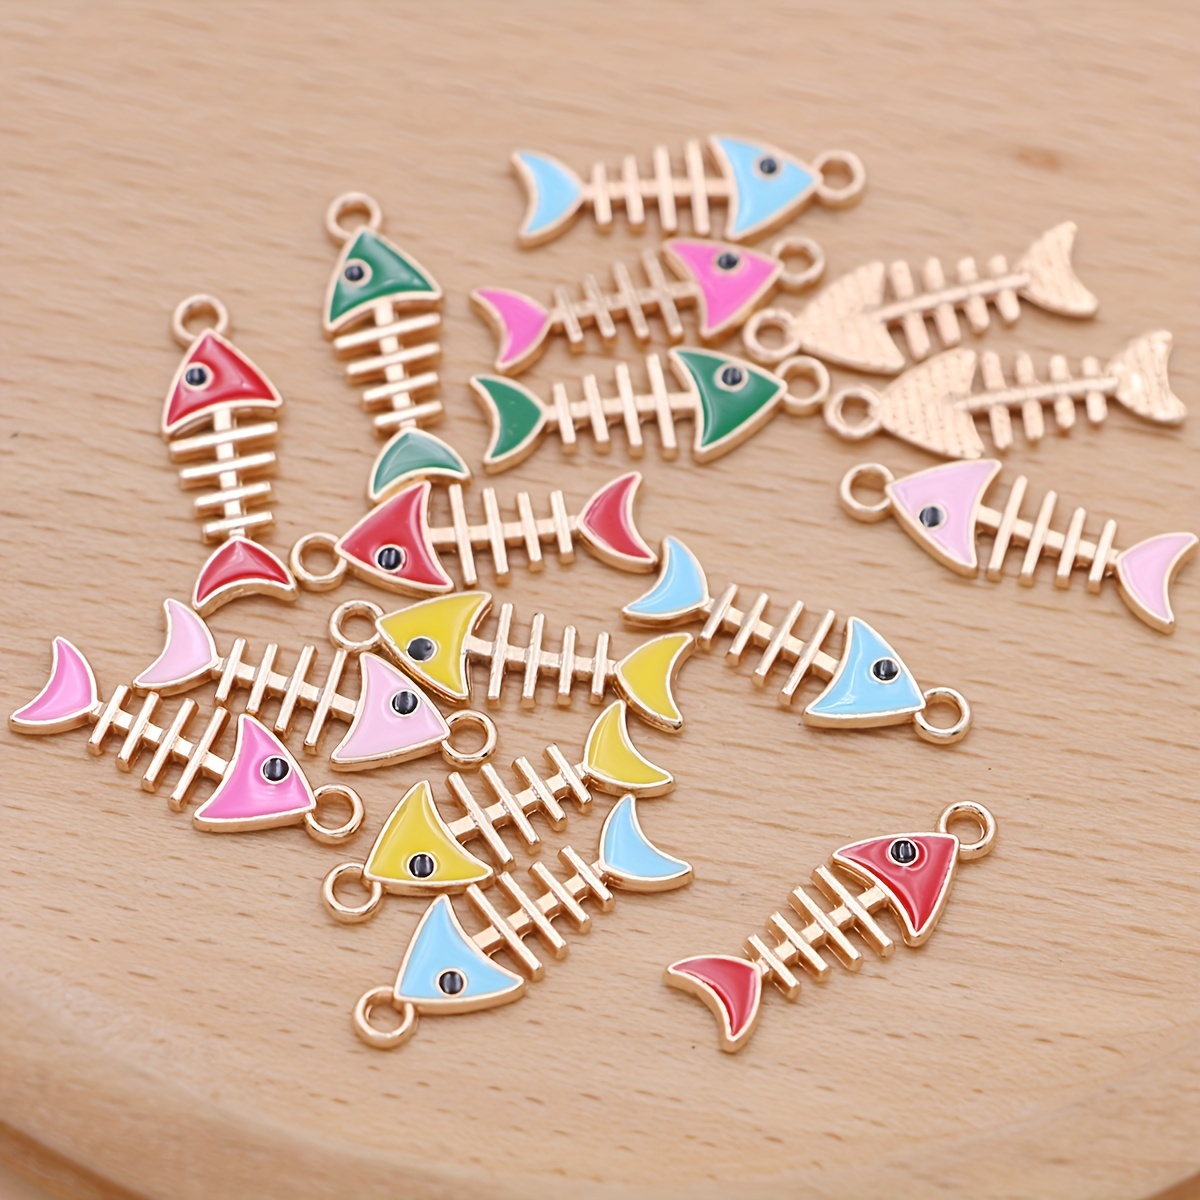 

20pcs Mix Enamel Charms Fishbone Pendants Marine Style Colorful Fish Bone Charms For Jewelry Making Diy Handmade Necklace Earrings Accessories Small Business Supplies